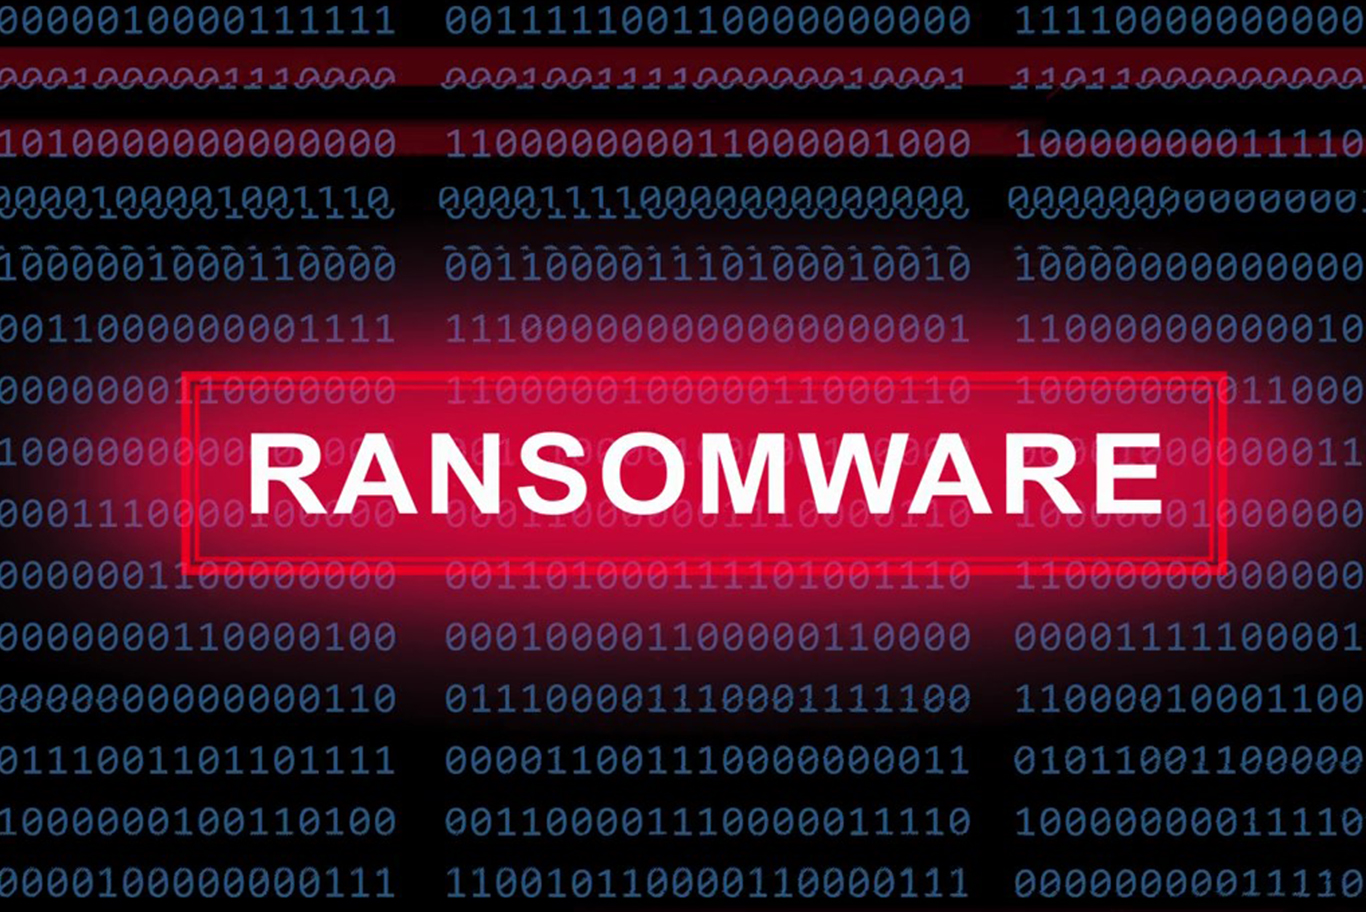 Malicious ISO File Leads to Domain Wide Ransomware